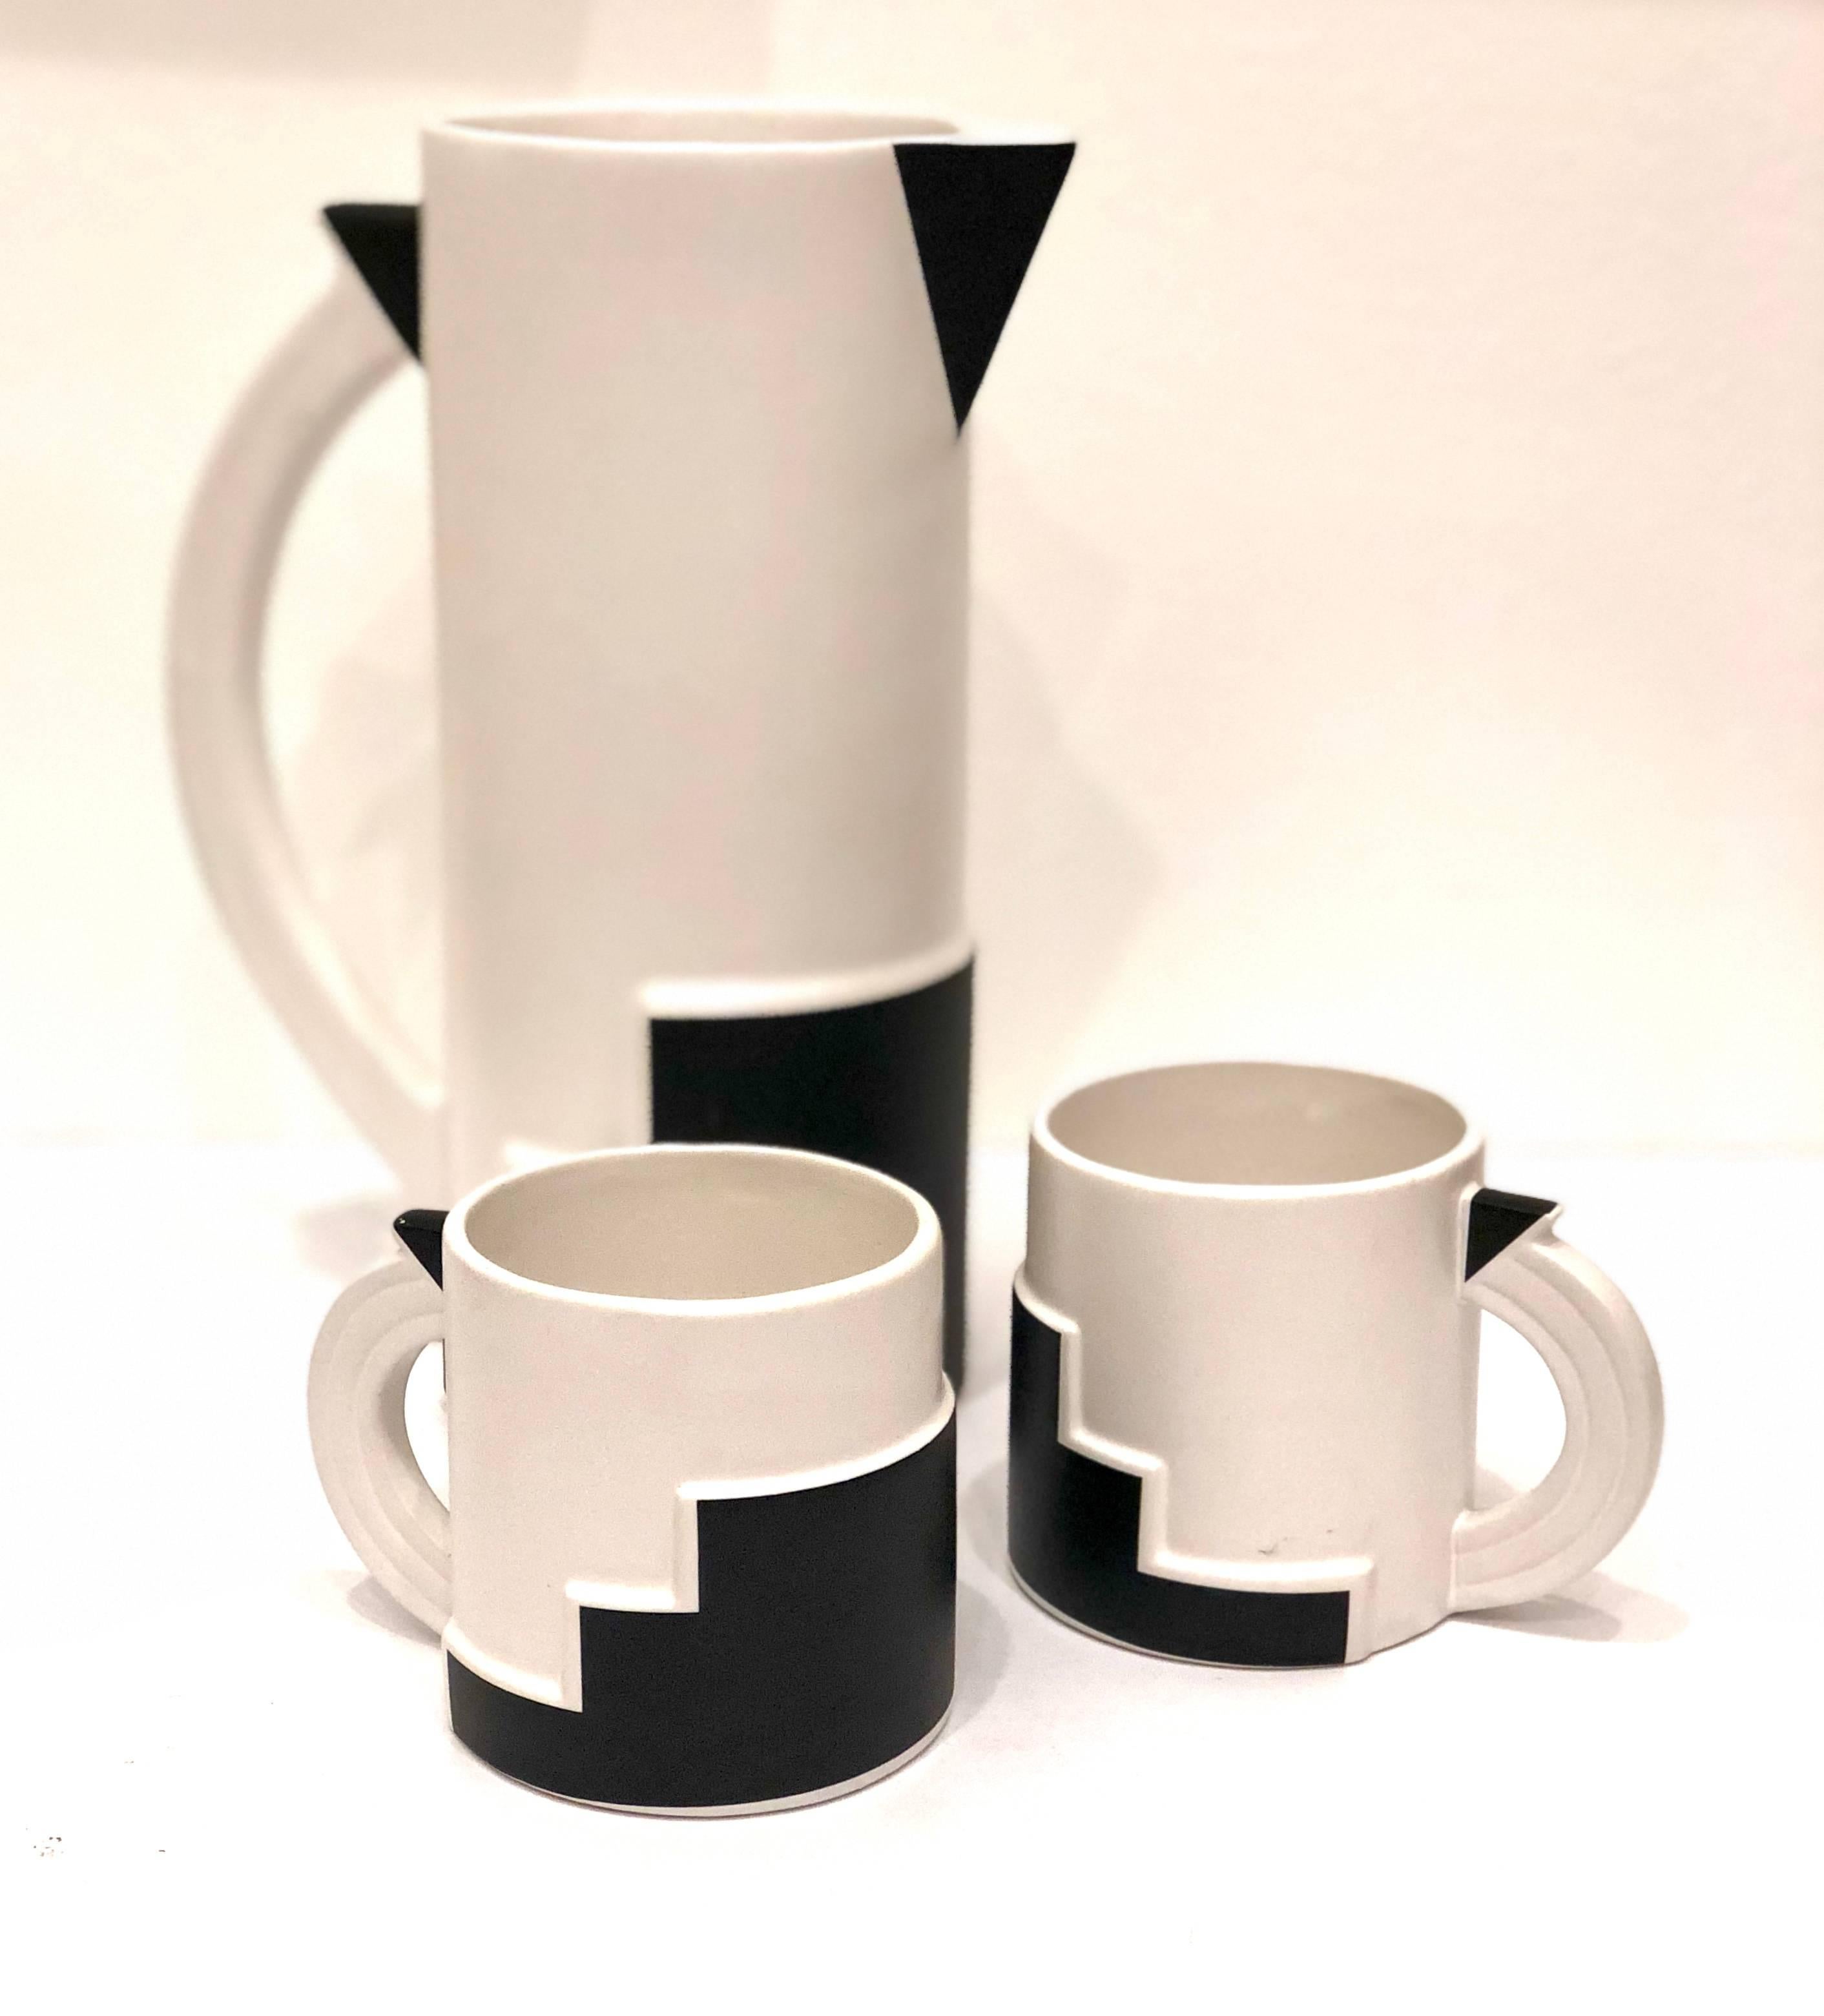 Art Deco design on these rare three-piece set designed by Kato Kogei for Fujimori the Manhattan collection in excellent condition no chips or cracks.